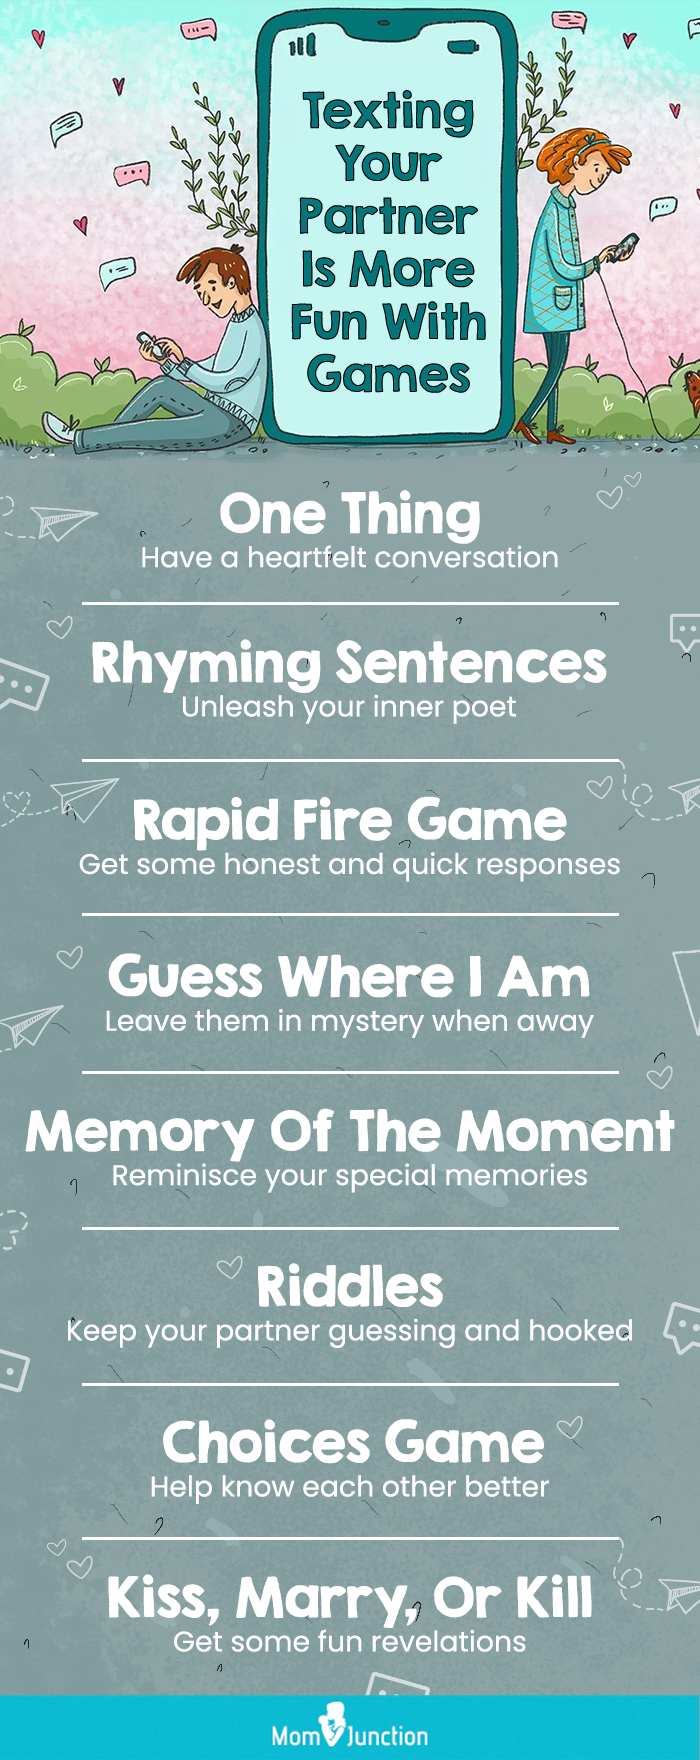 9 Fun Texting Games To Play For Couples - IcebreakerIdeas